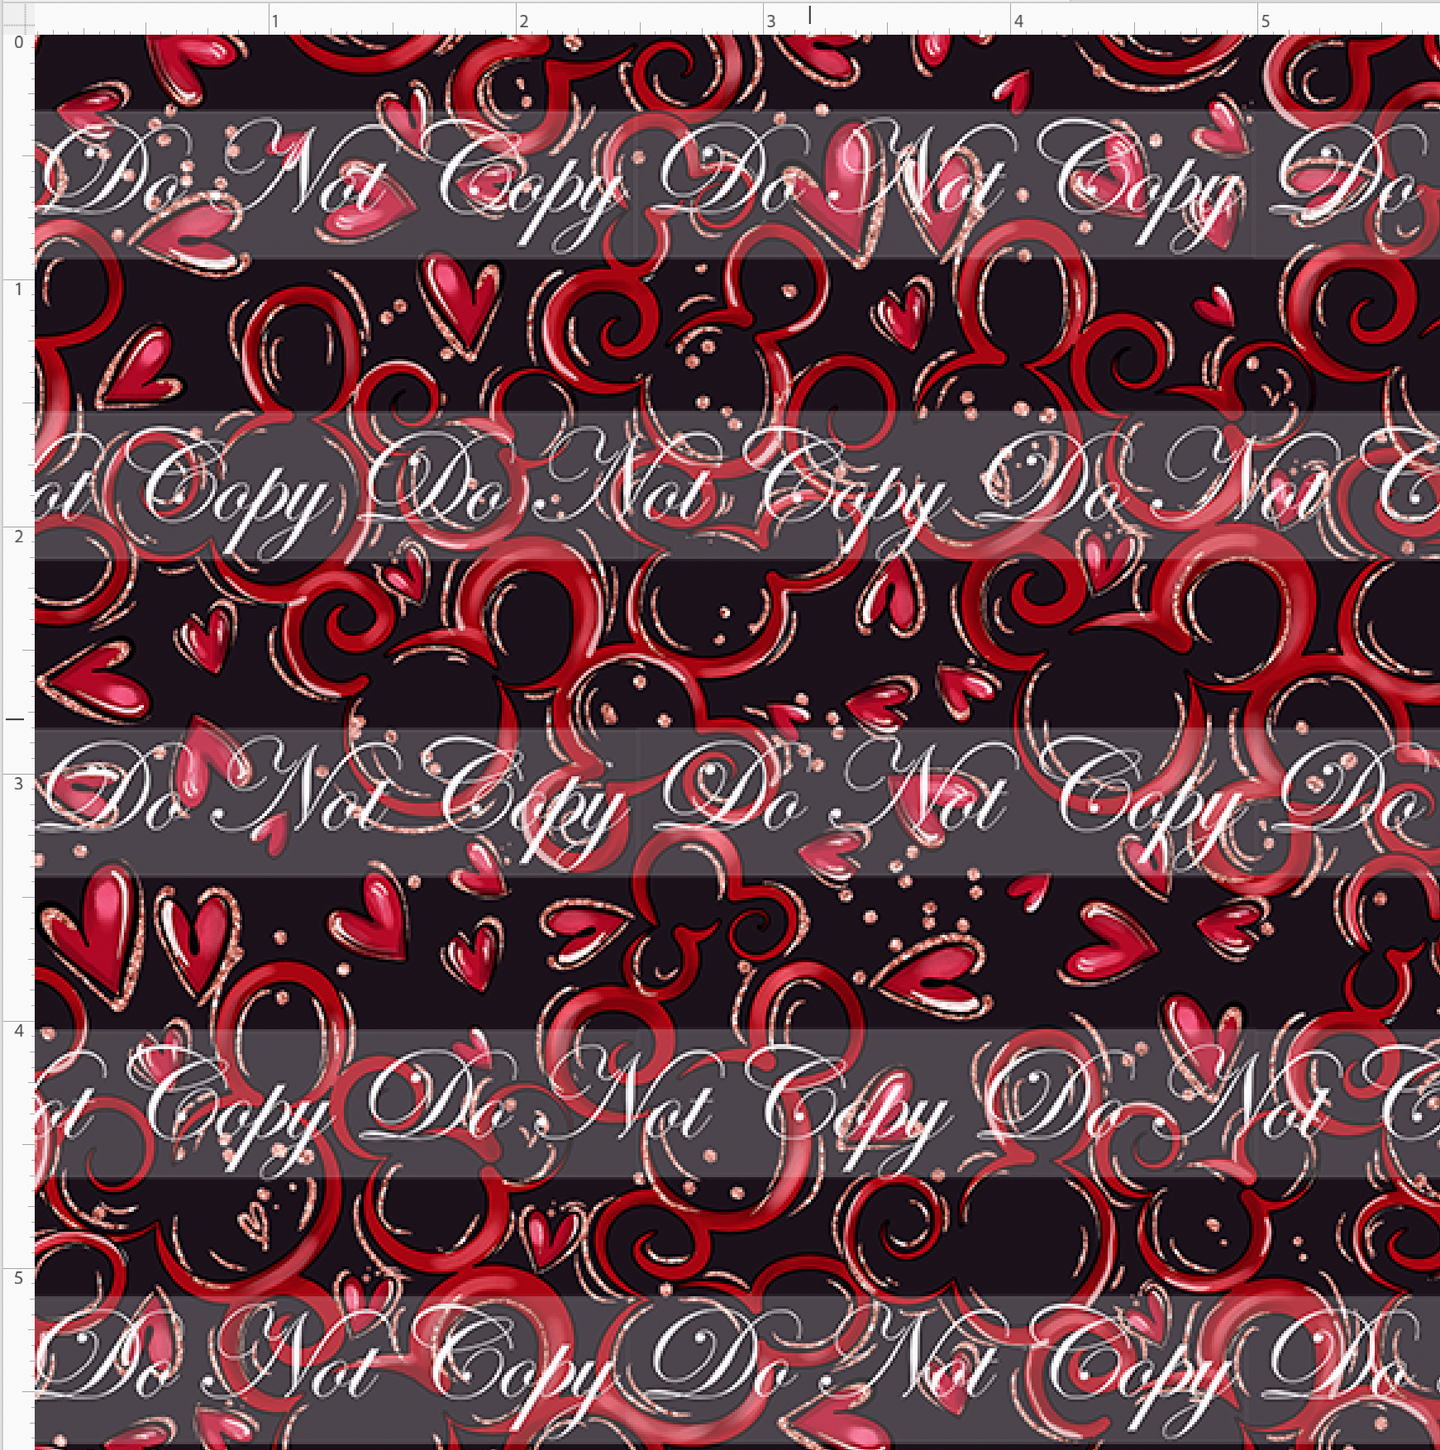 CATALOG - PREORDER R103 - A Mouse Love Story - Mouse Heart Swirls - Red Black - MINI SCALE